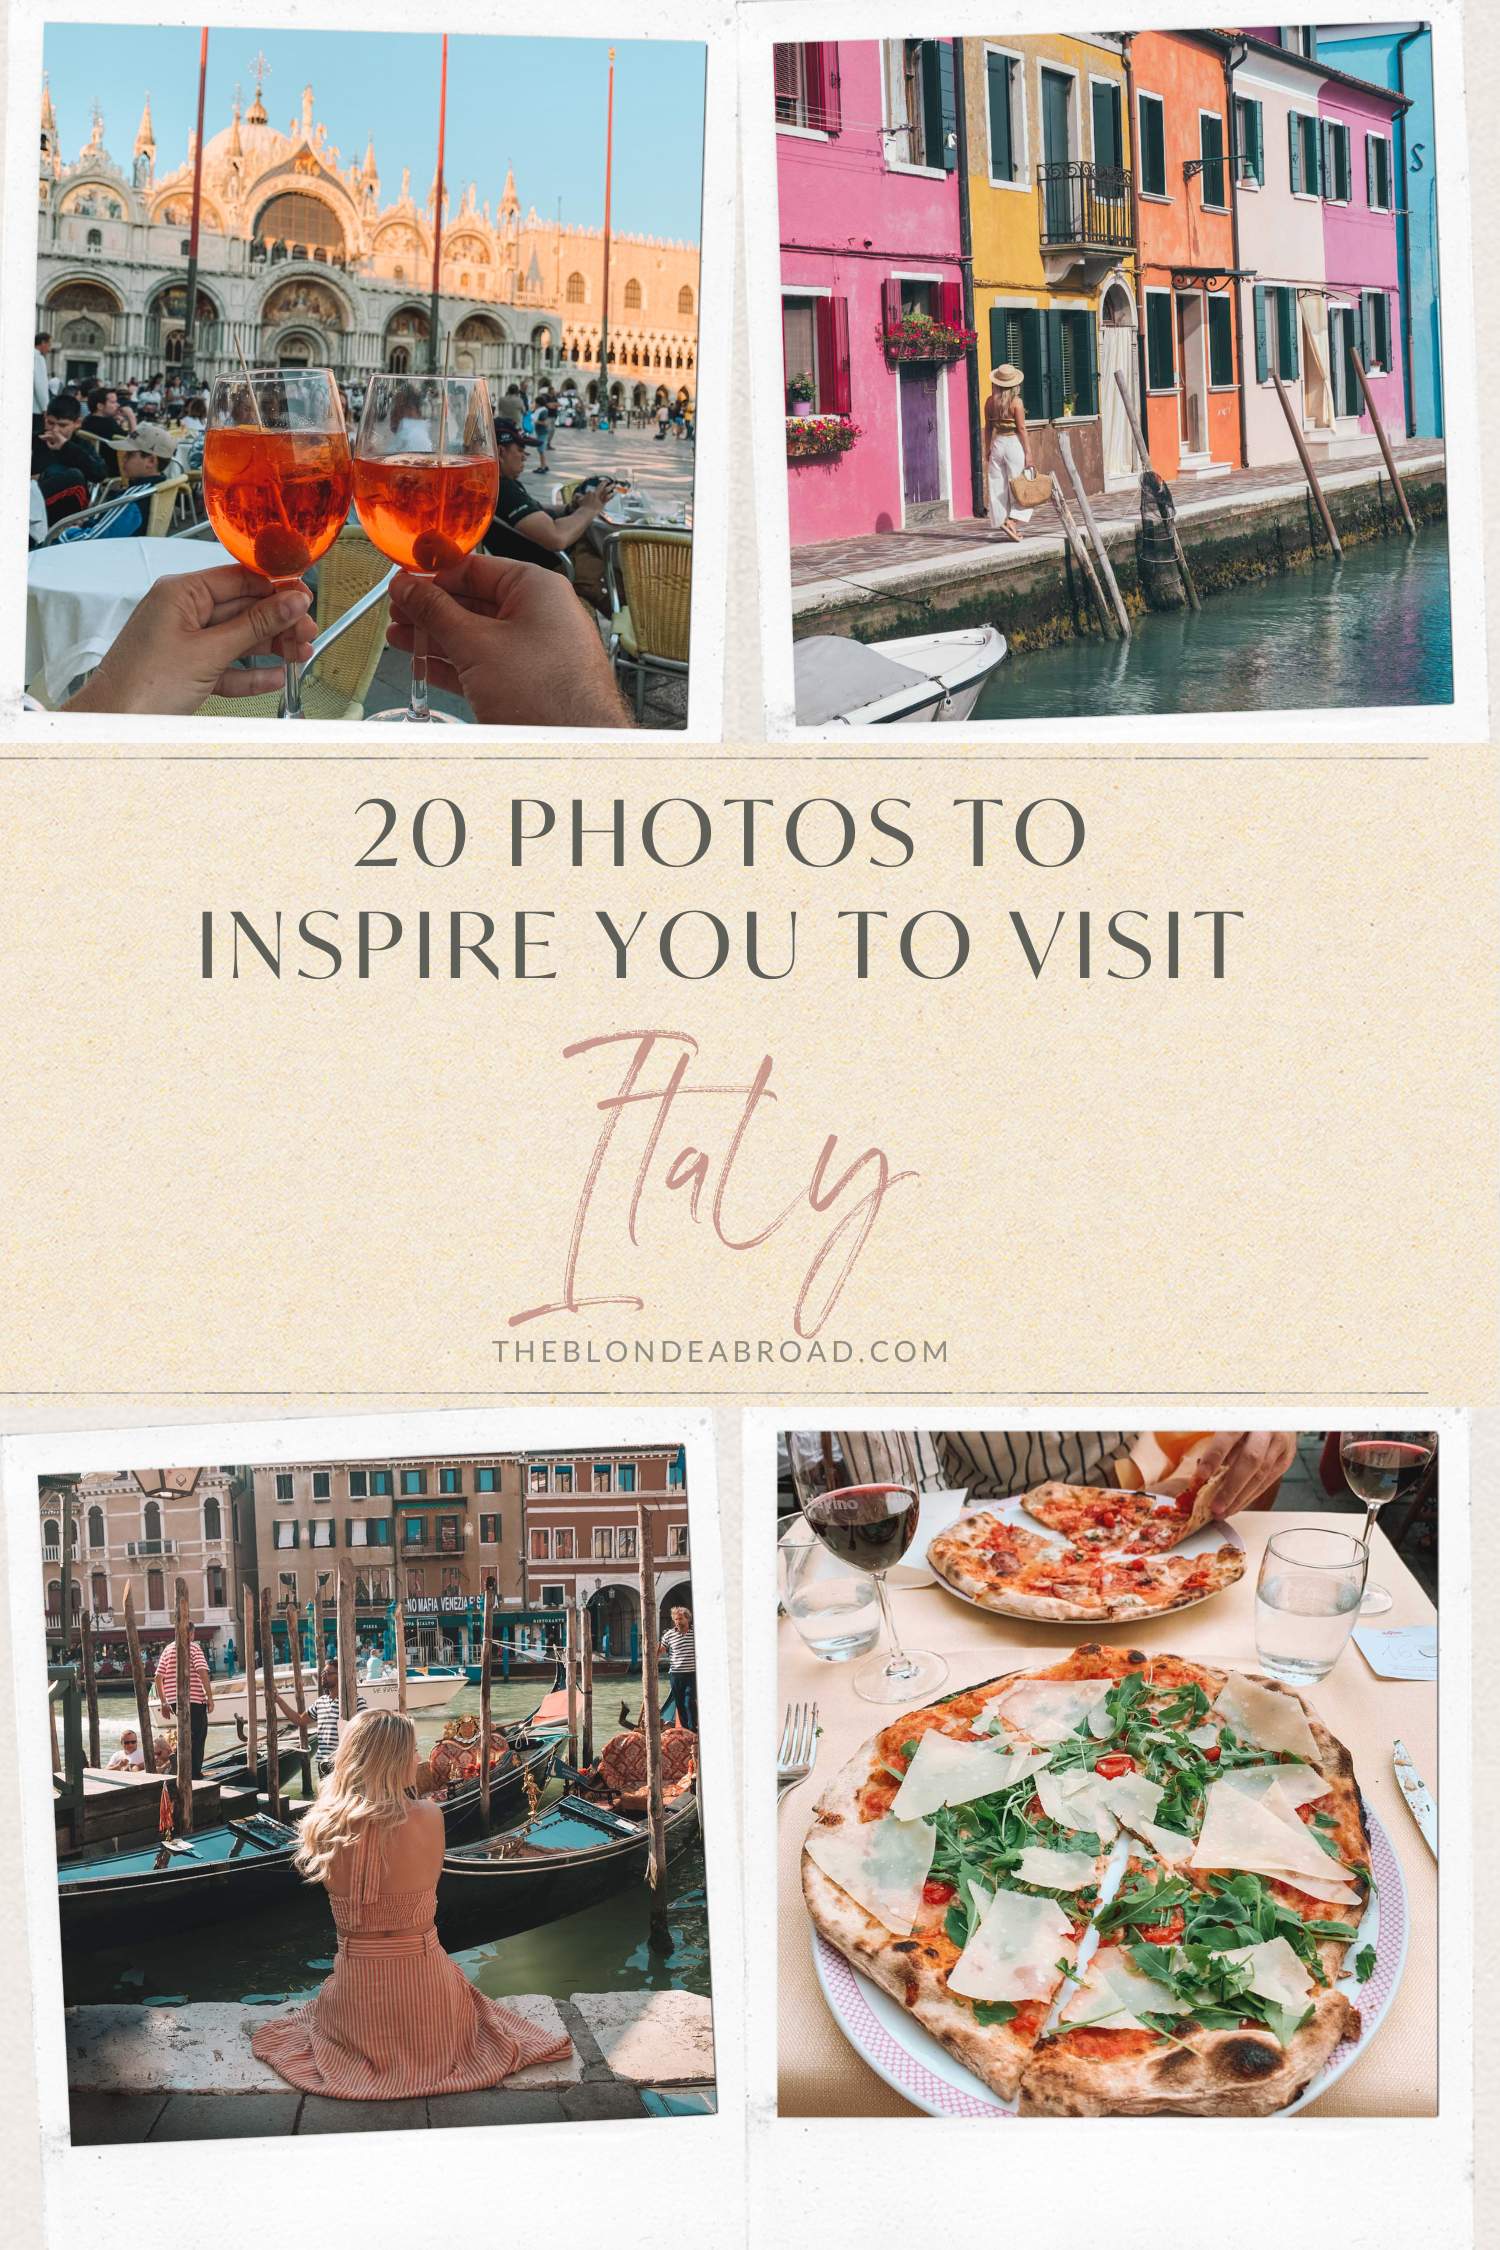 20 Photos To Inspire You To Visit Italy